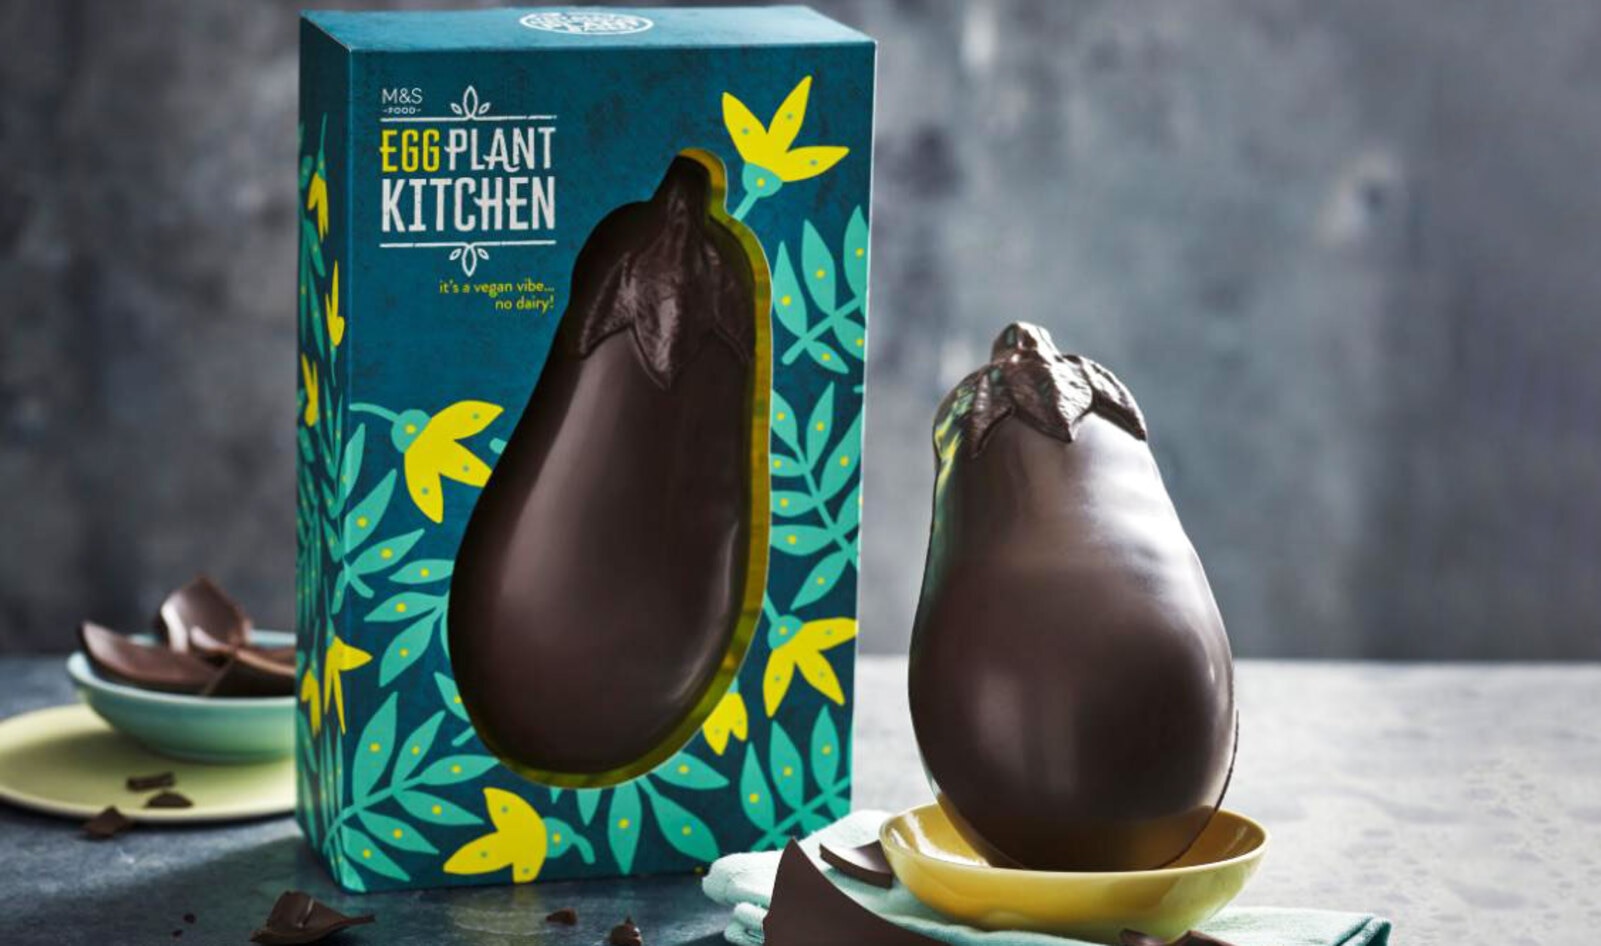 Easter Eggs Get a Naughty Vegan Makeover at This British Retailer